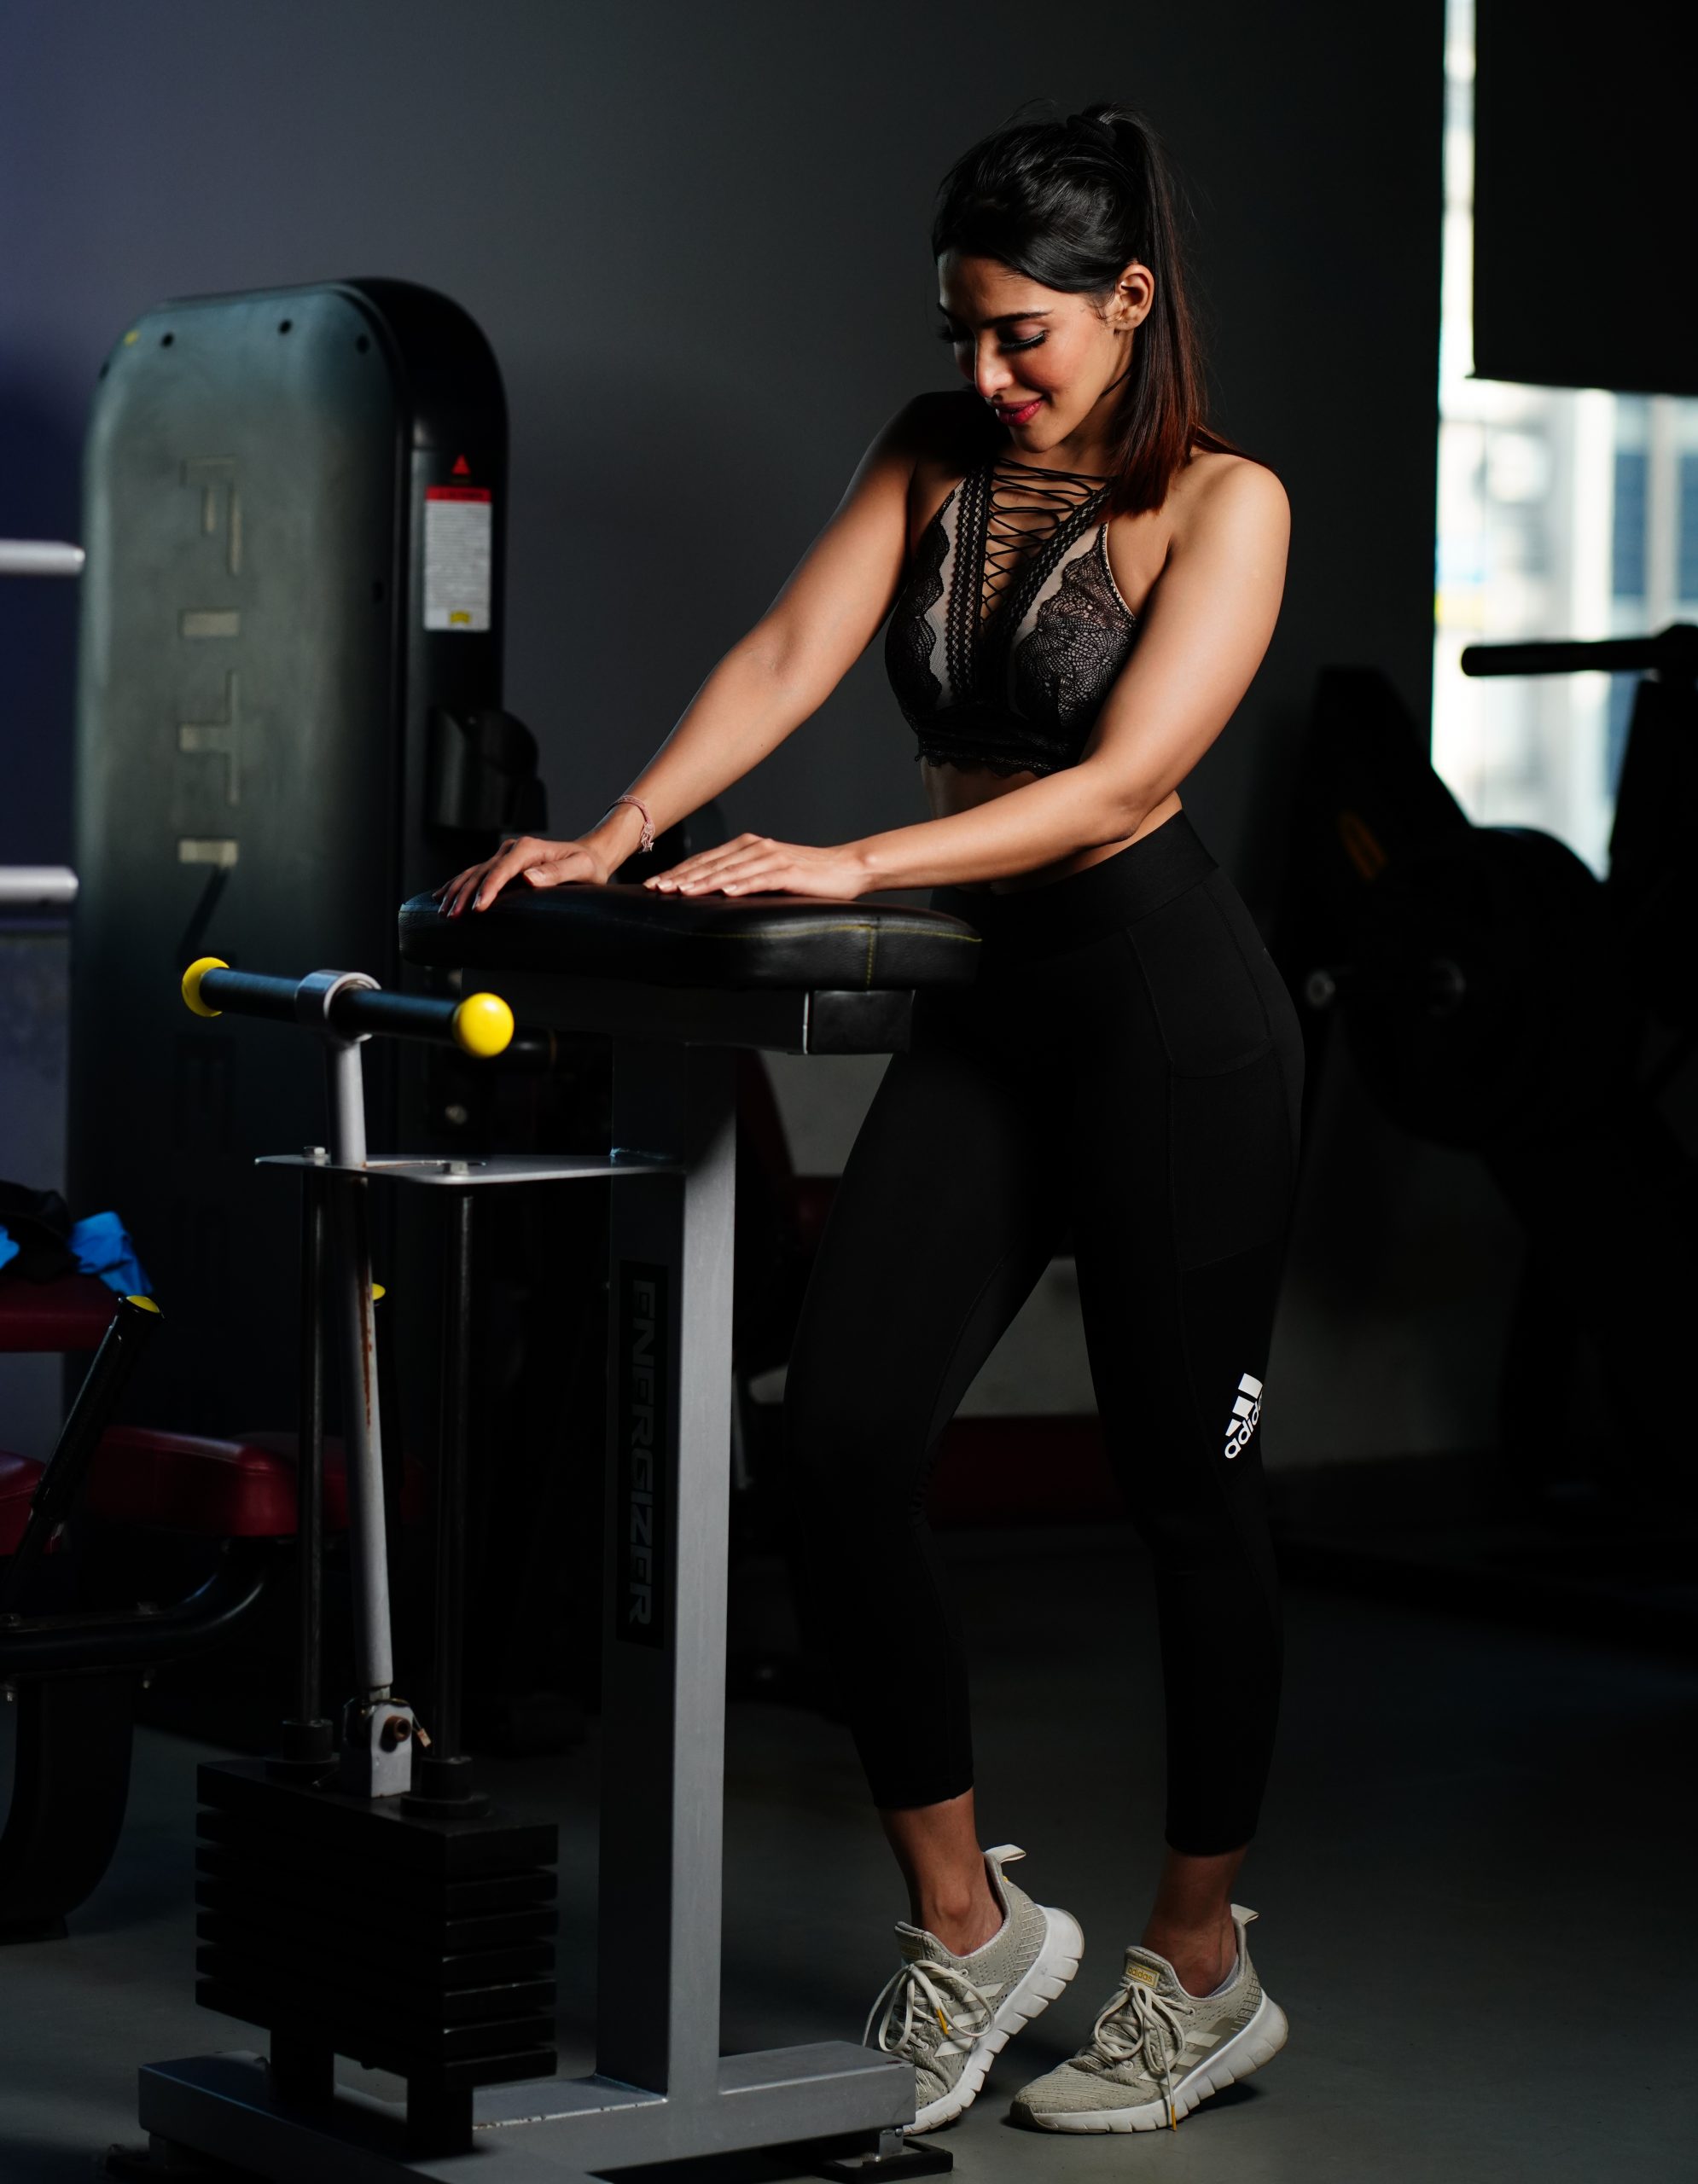 Slim girl standing next to a gym equipment